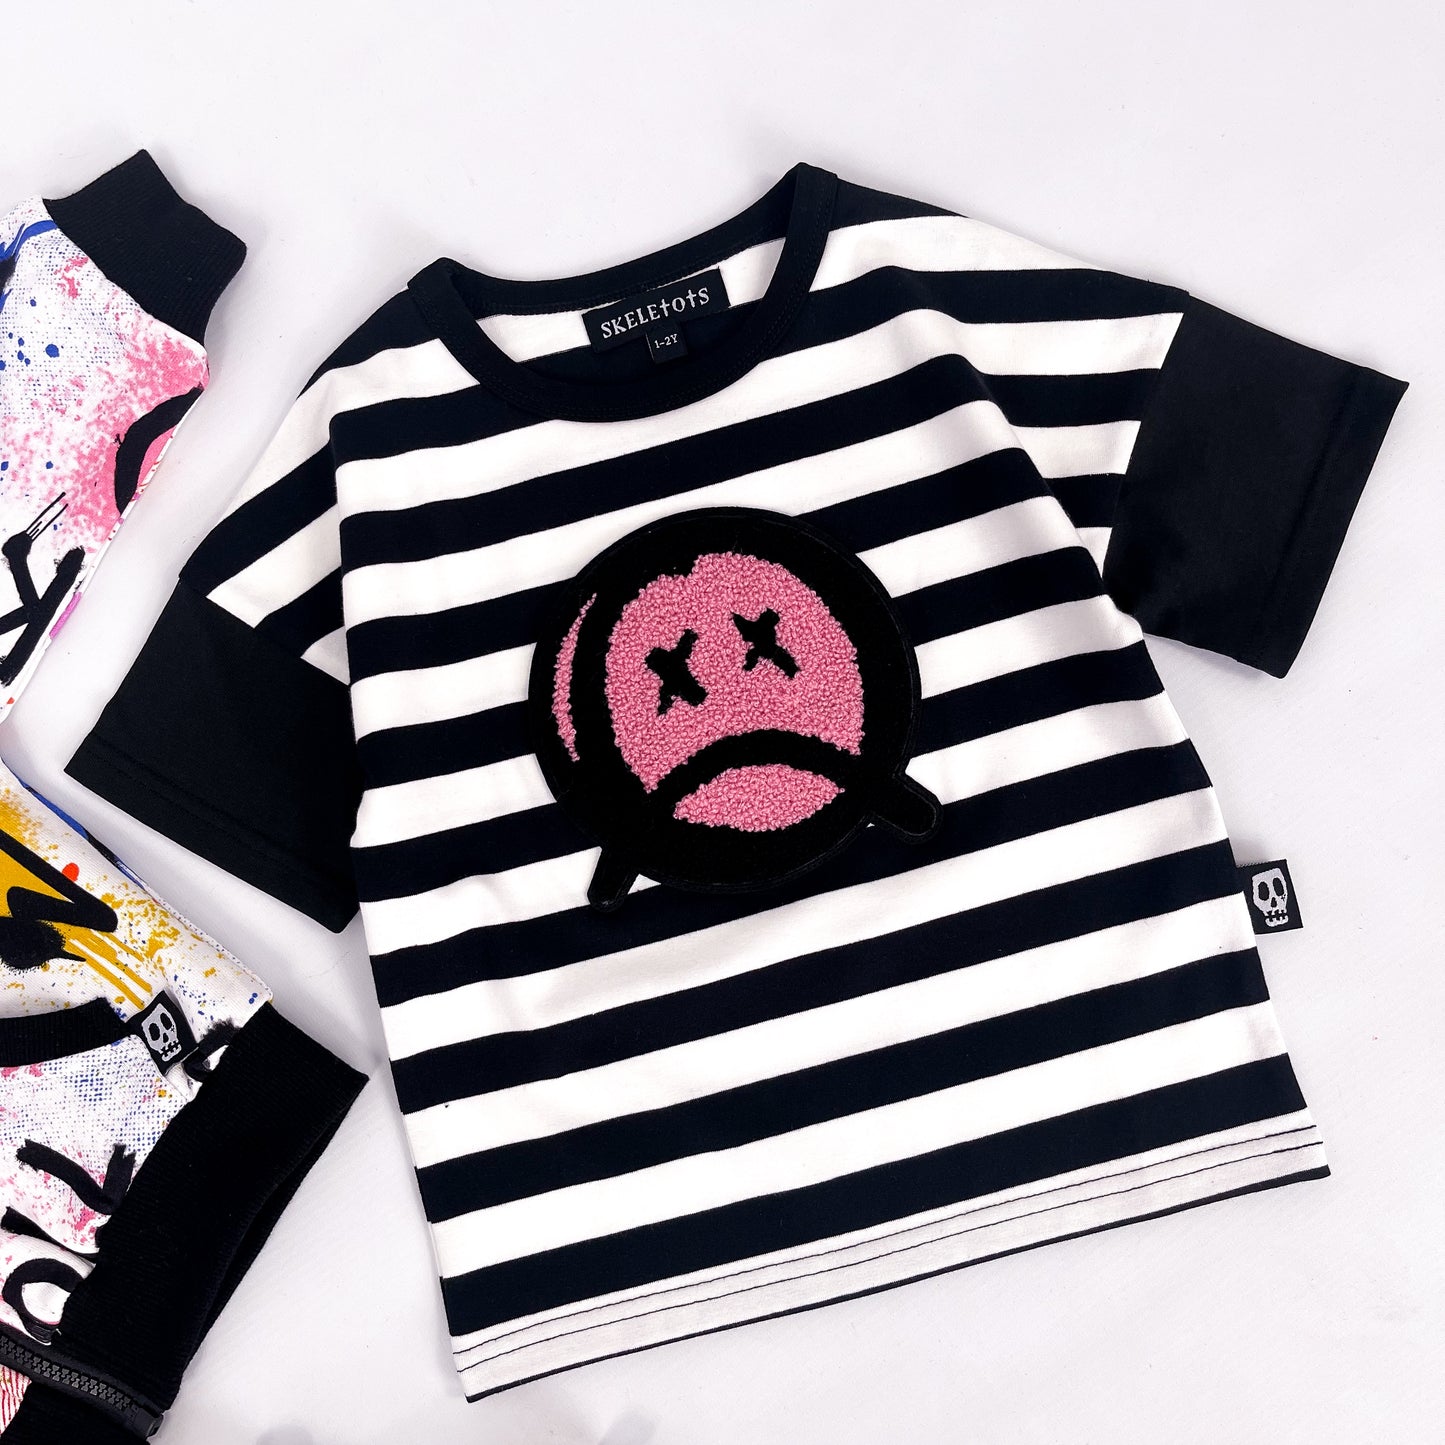 Kids black and white striped tee shirt with sad face patch